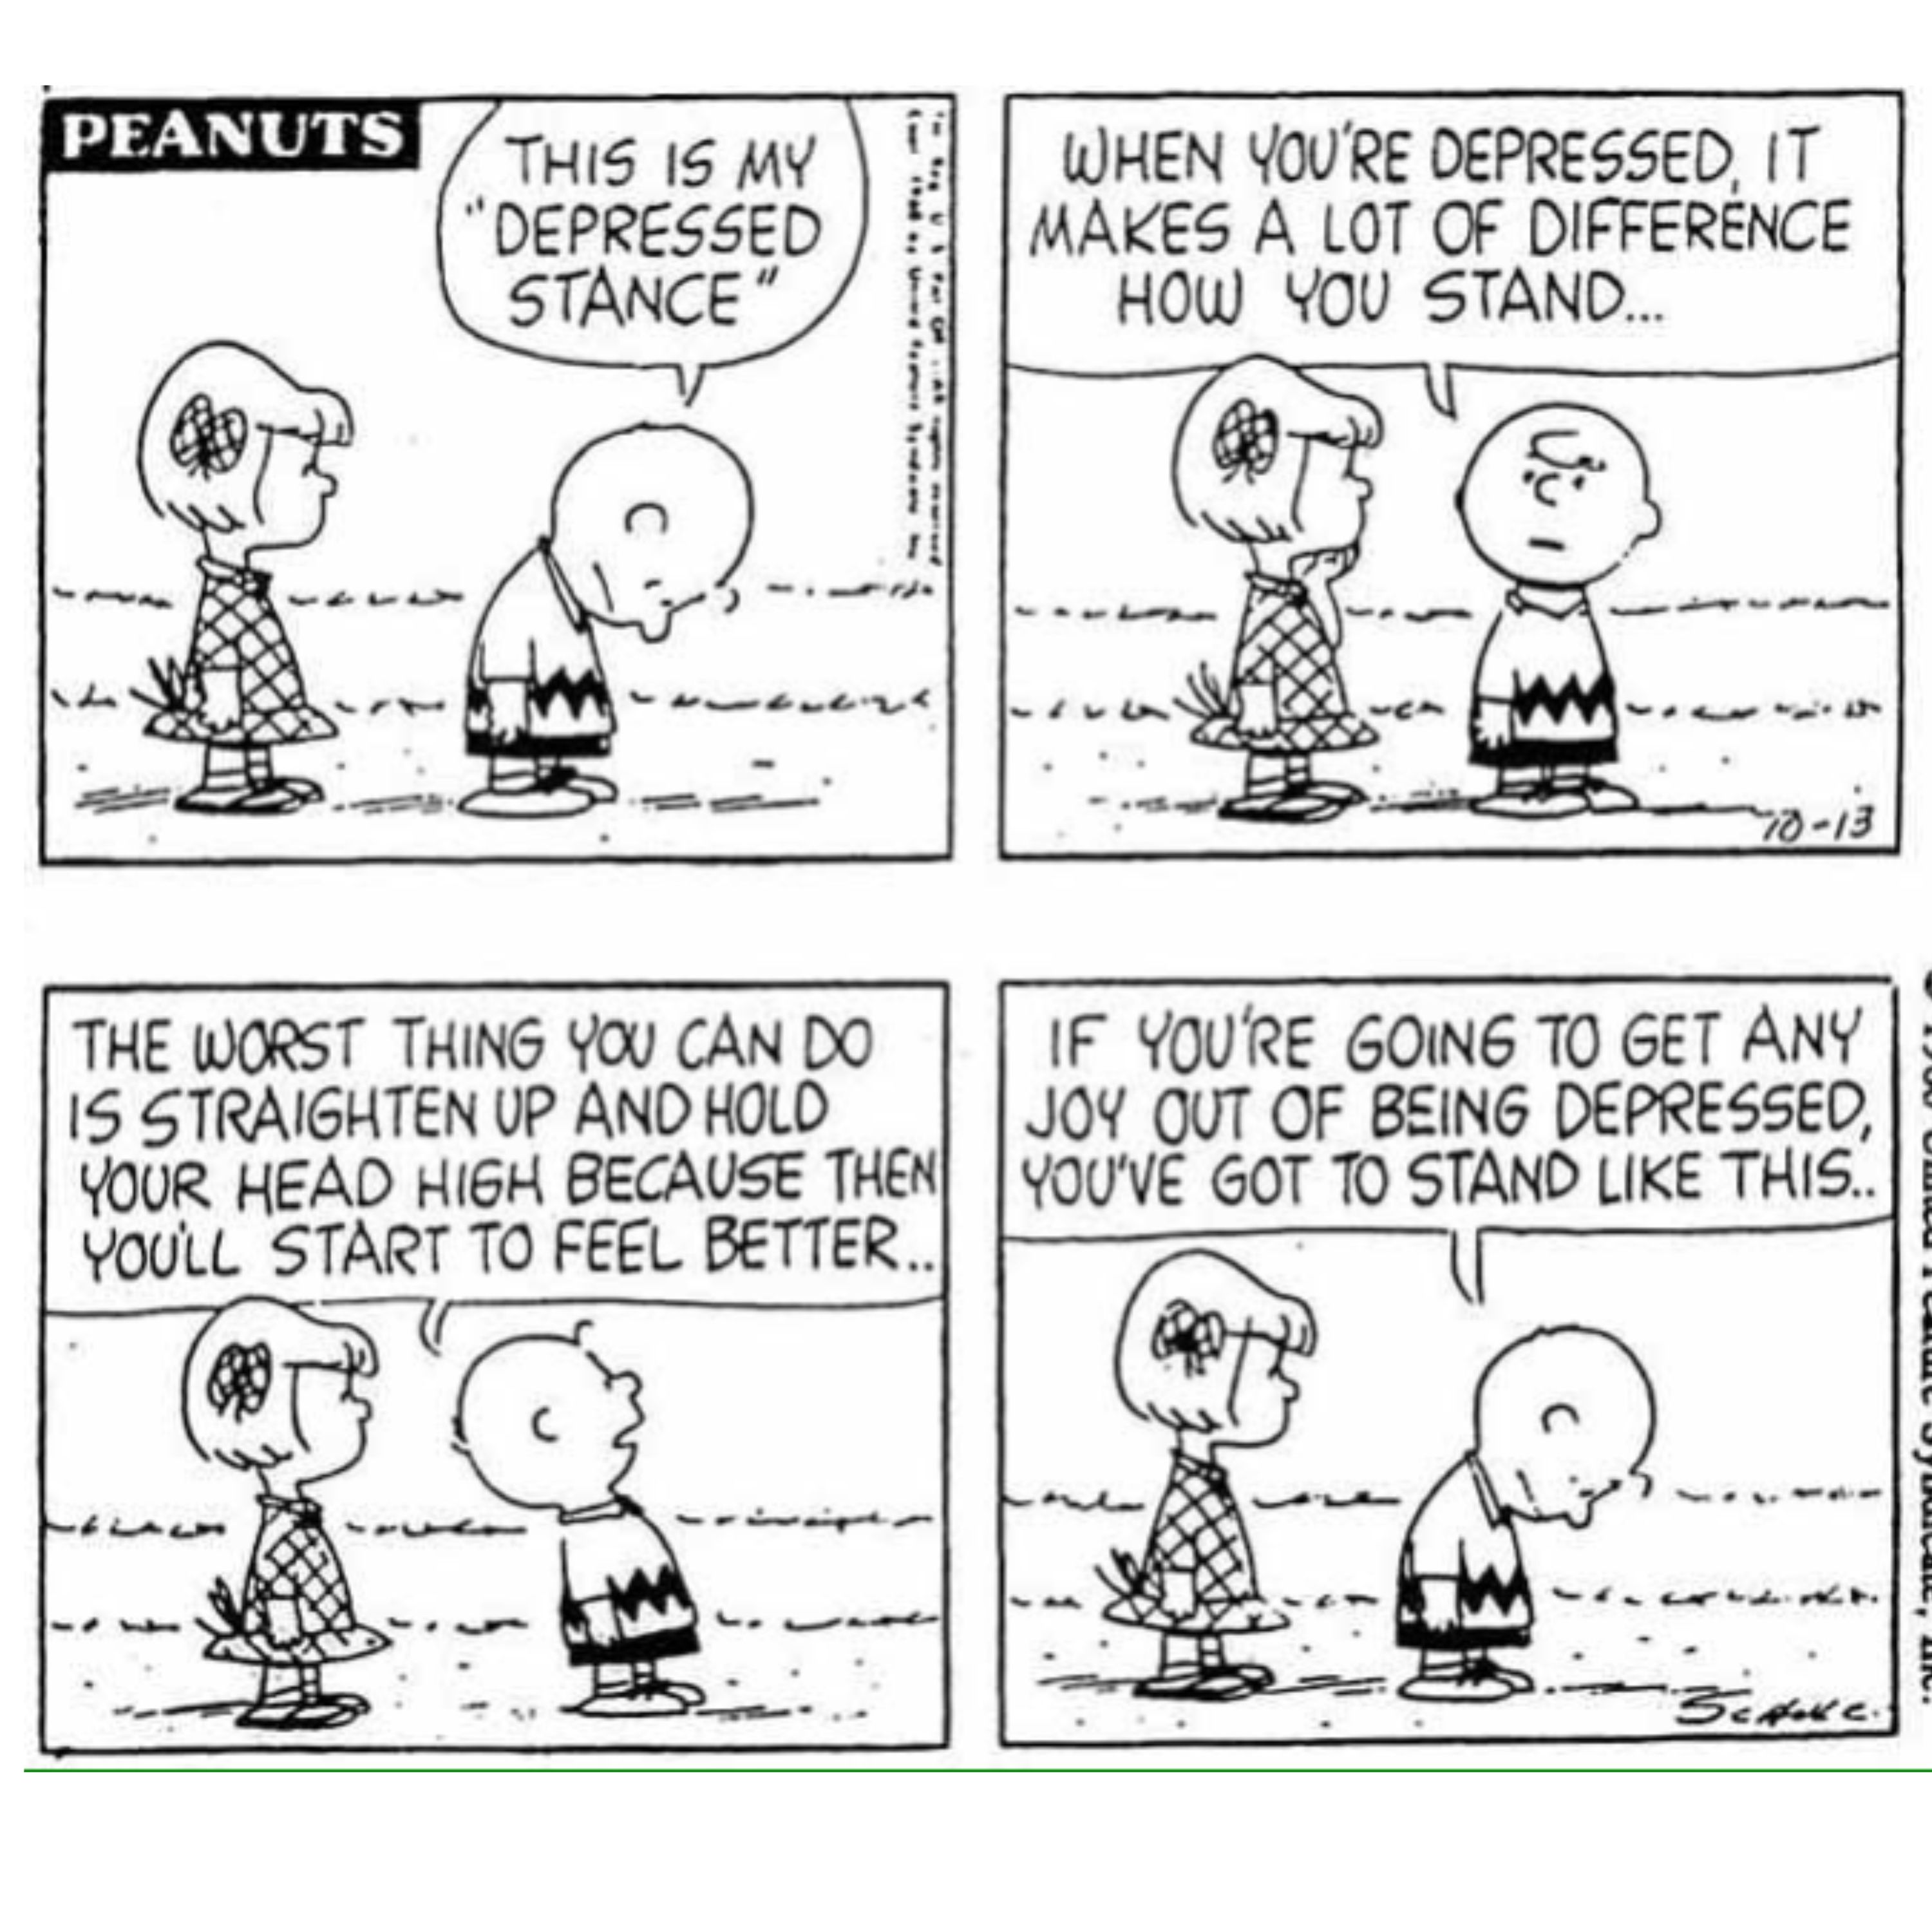 10 Greatest Peanuts Comics With a Meaningful Life Lesson